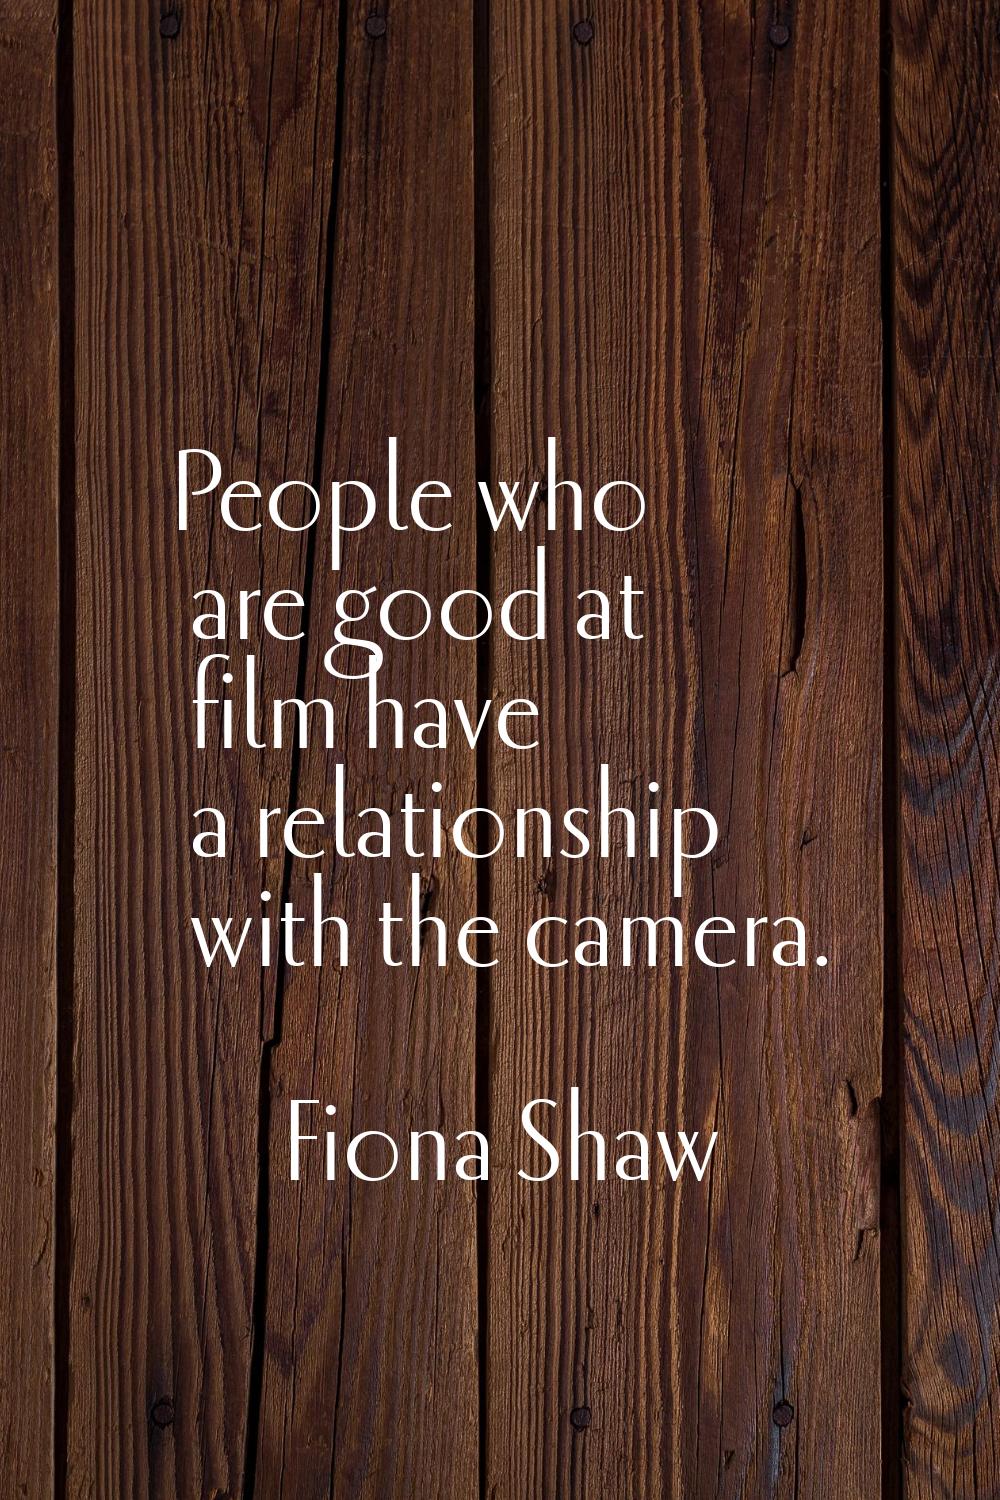 People who are good at film have a relationship with the camera.